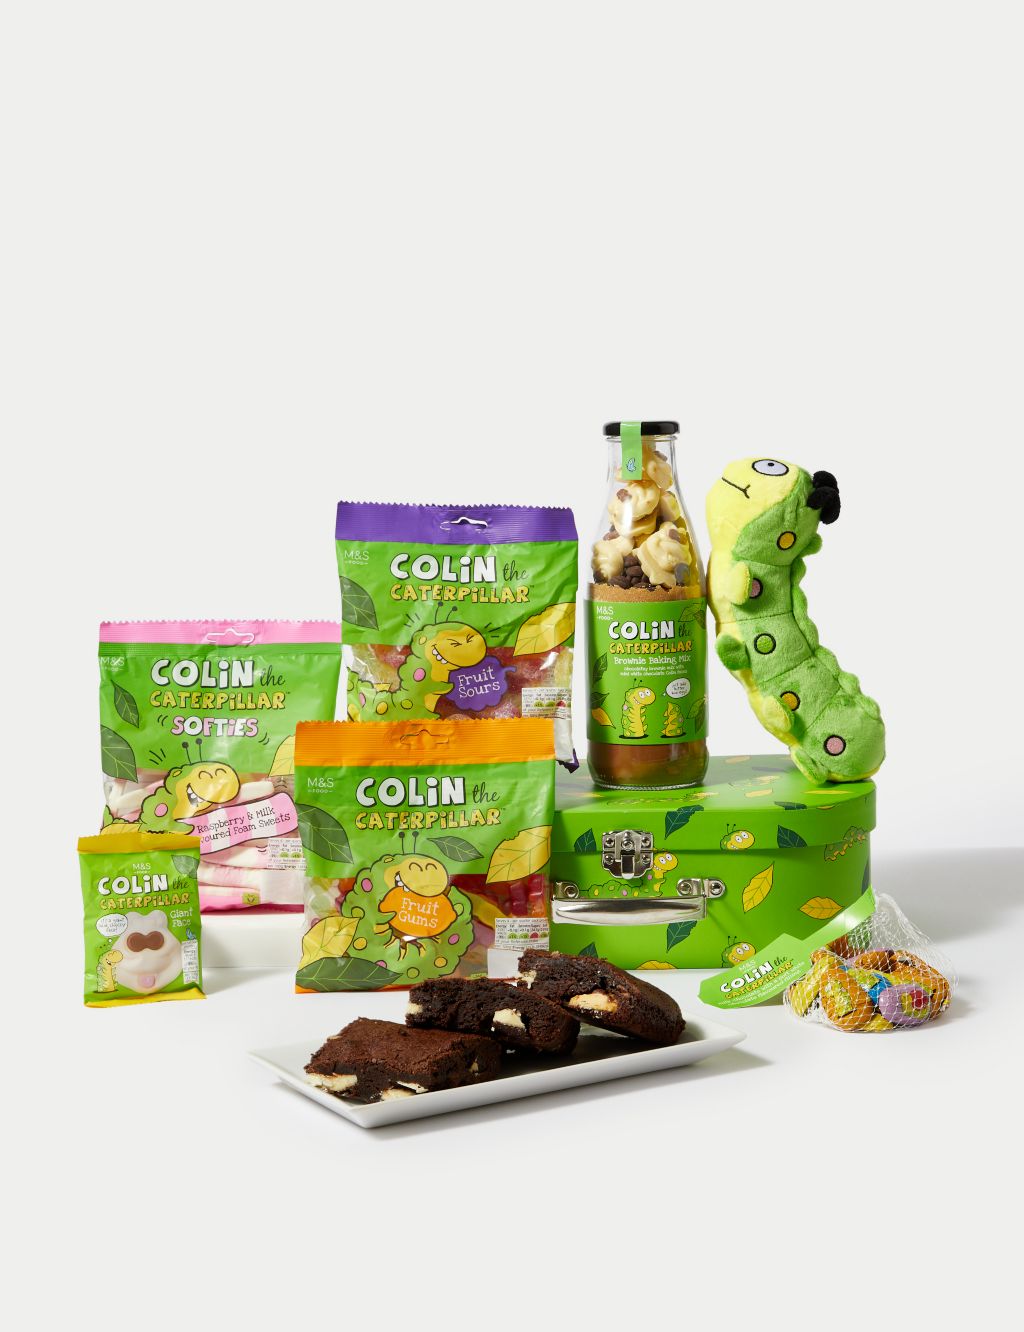 Colin the Caterpillar™ Suitcase Gift image 1